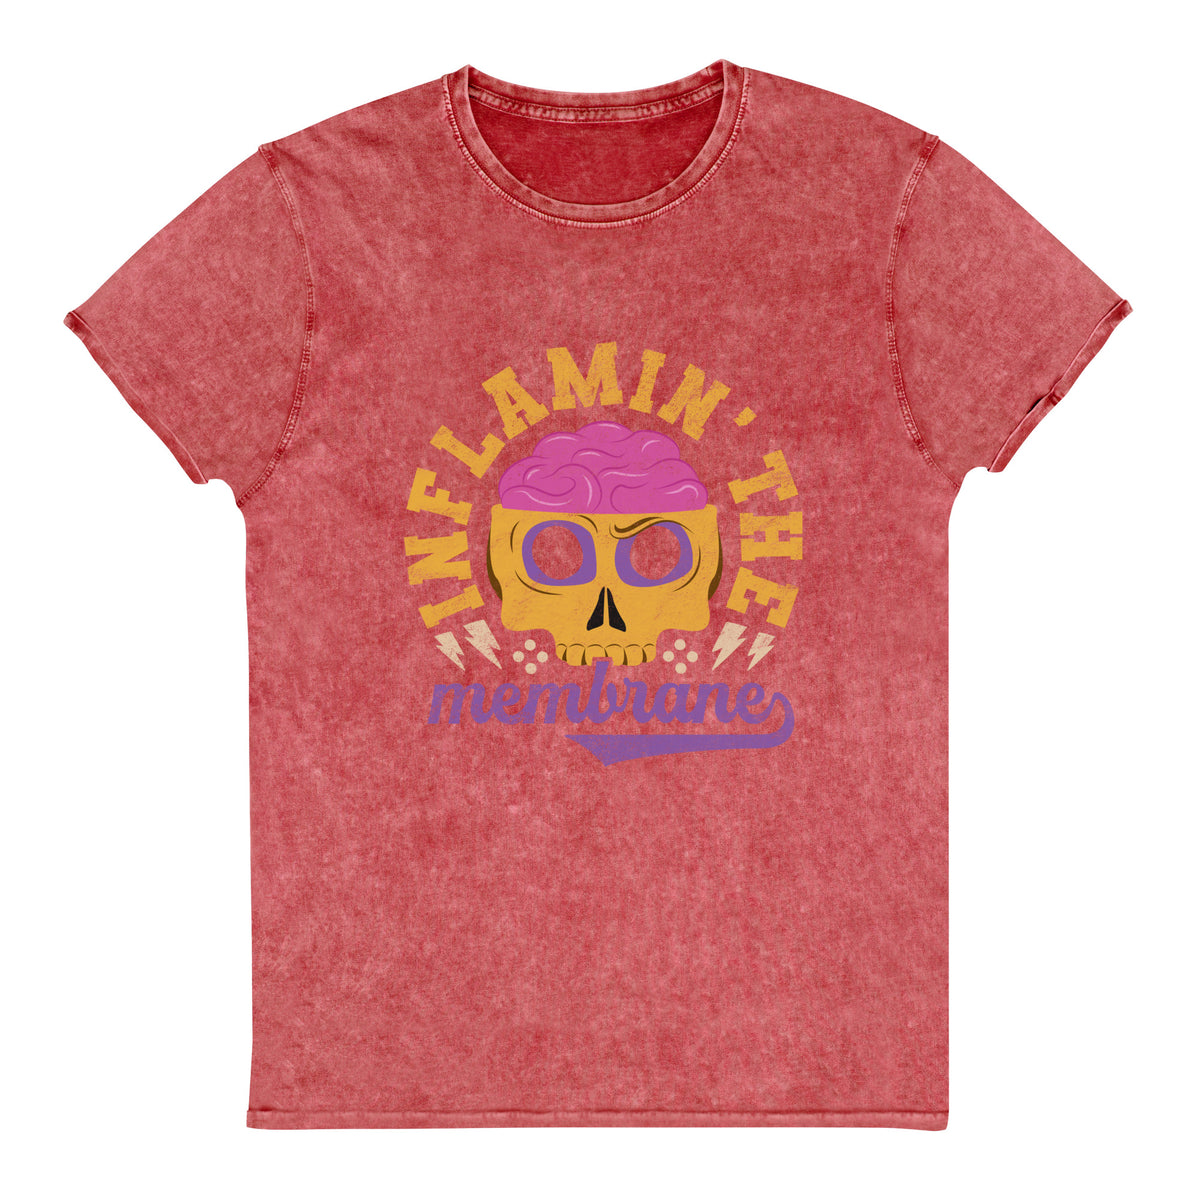 Inflamin' The Membrane Mineral Wash Tee